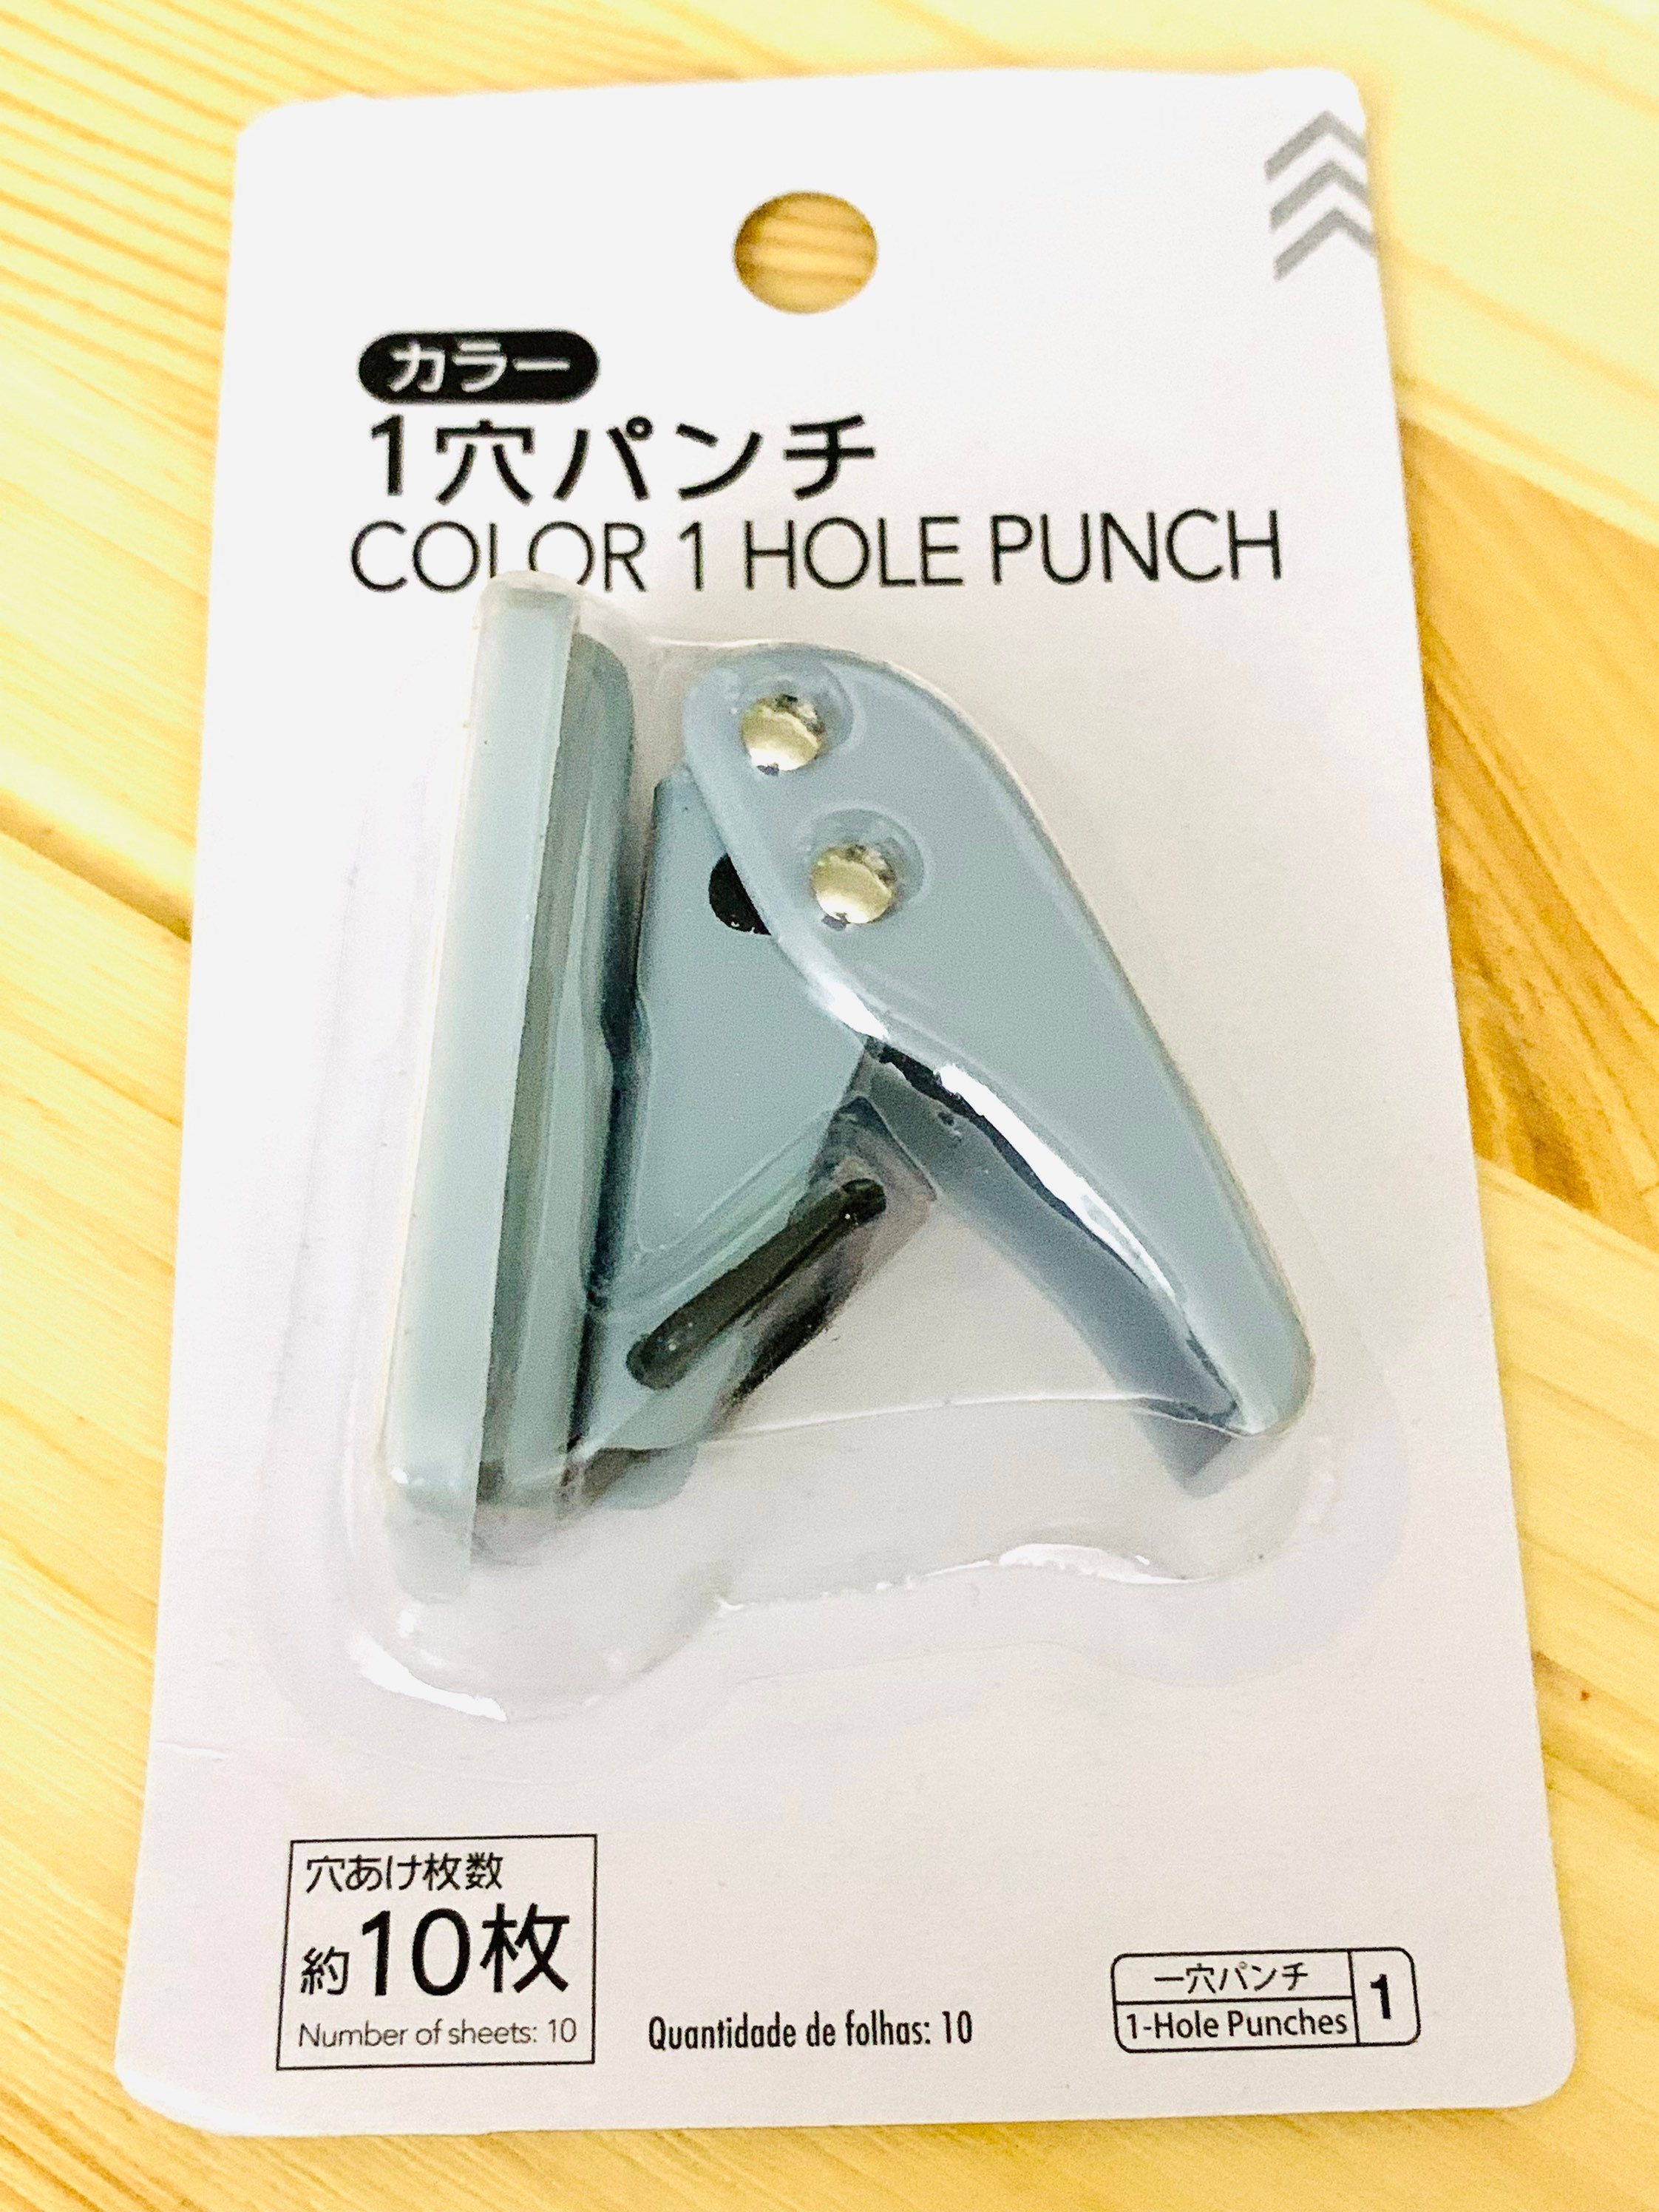 One Small Gray Hole Punch, Gray Hole Punch, 1 Hole Punch, Paper Punch,  Paper Hole Punch, Craft Supplies, Scrapbooking, Journaling 